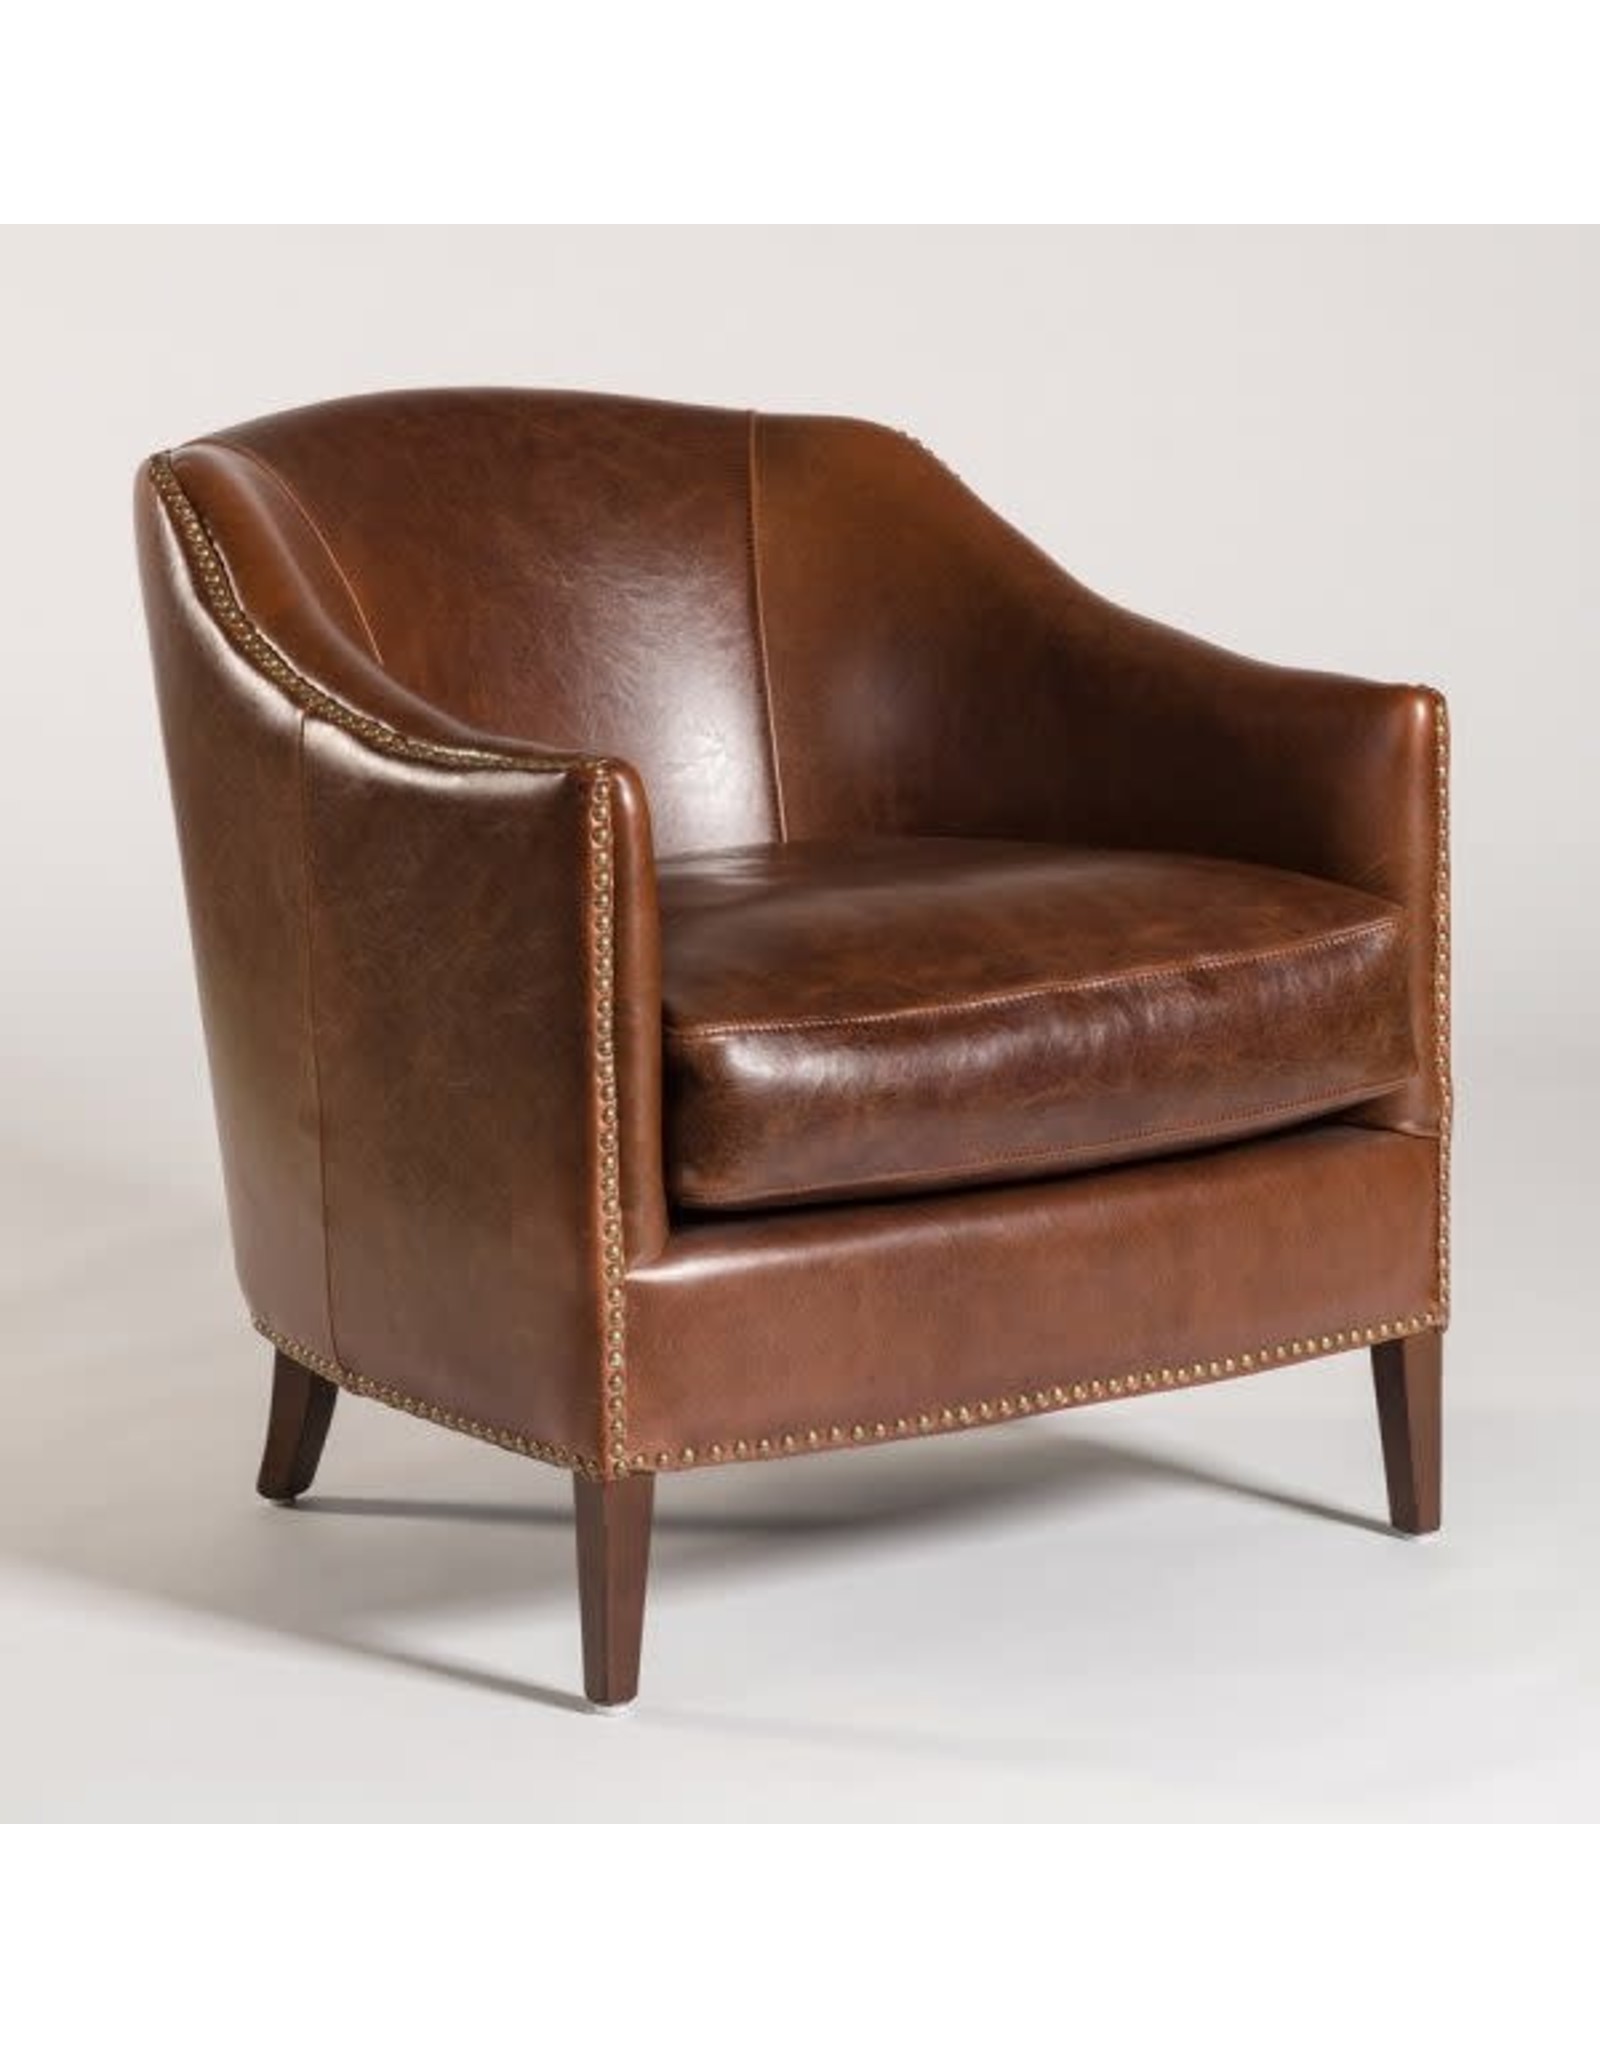 Website Madison Occasional Chair in Antique Saddle